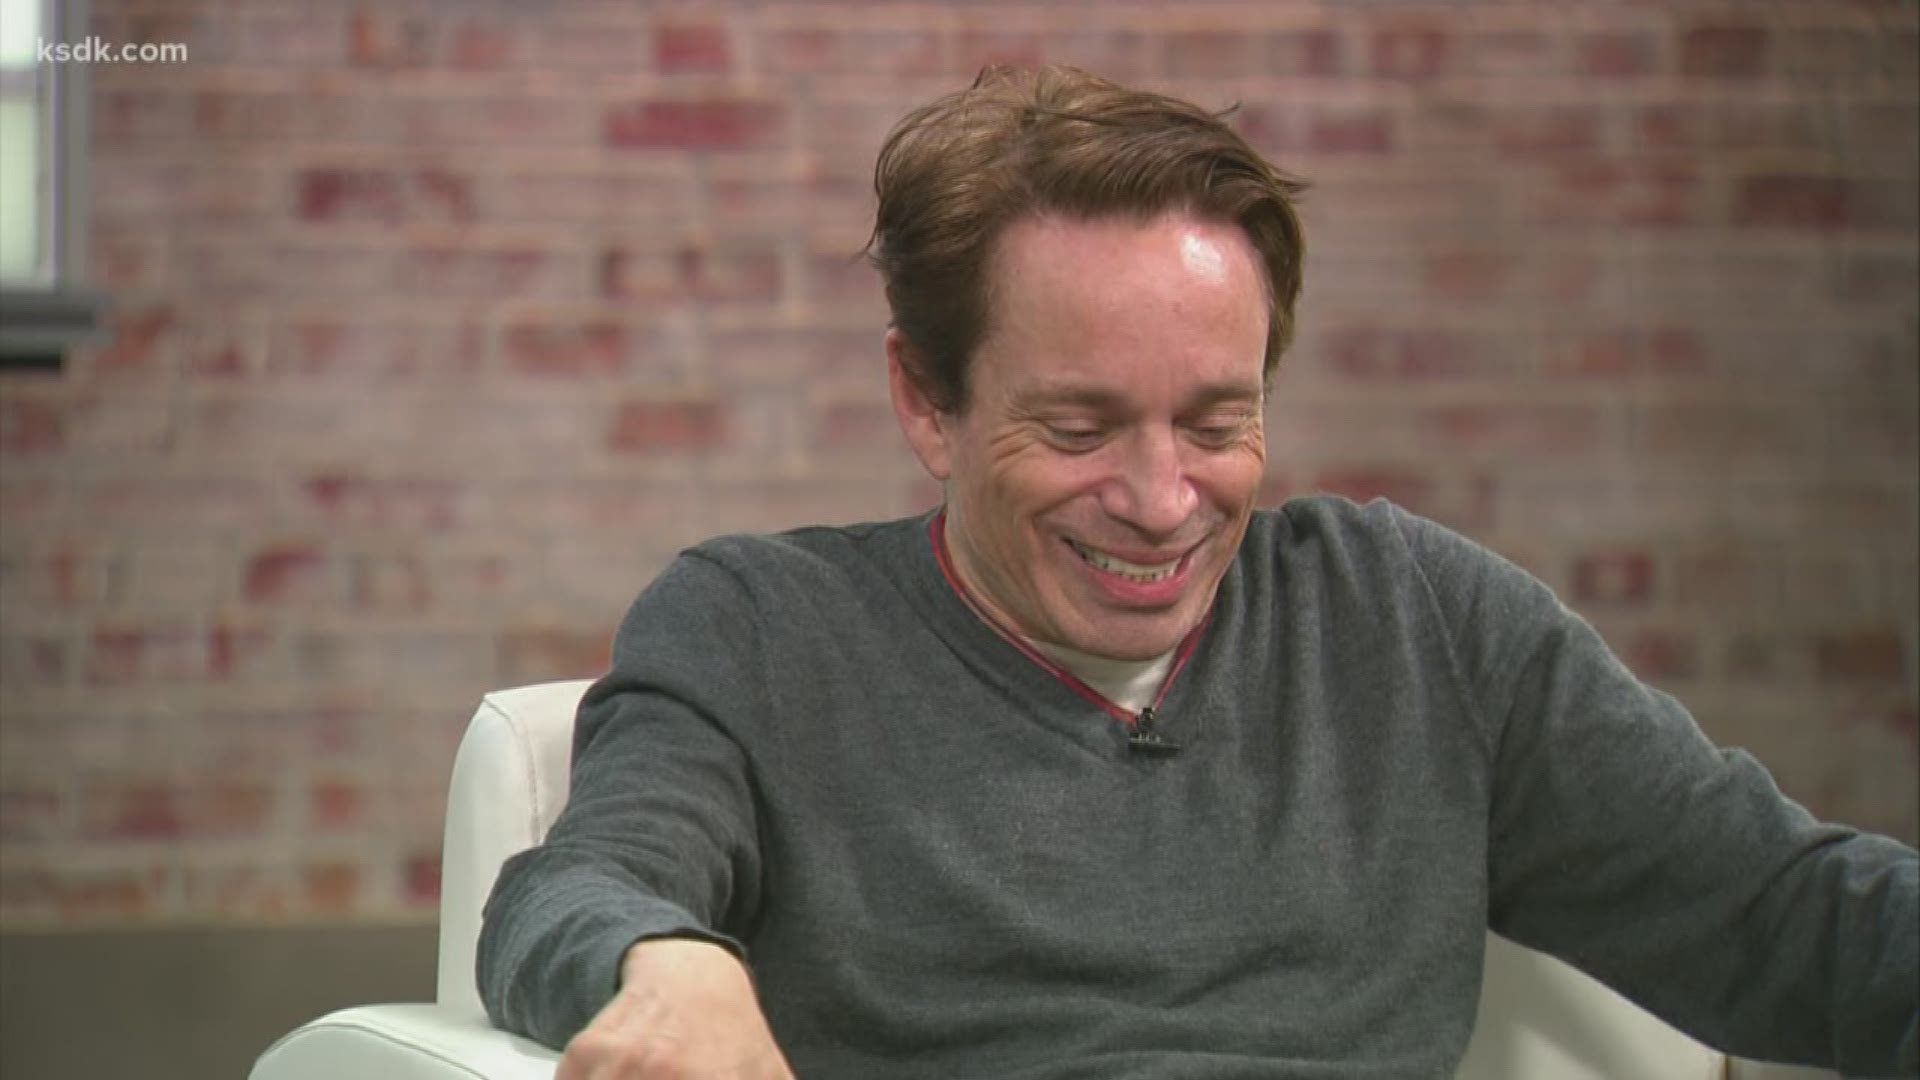 Chris Kattan stopped by Show Me St. Louis prior to his shows at St. Louis Funny Bone. Check out what he thought about Gooey Butter Cake.